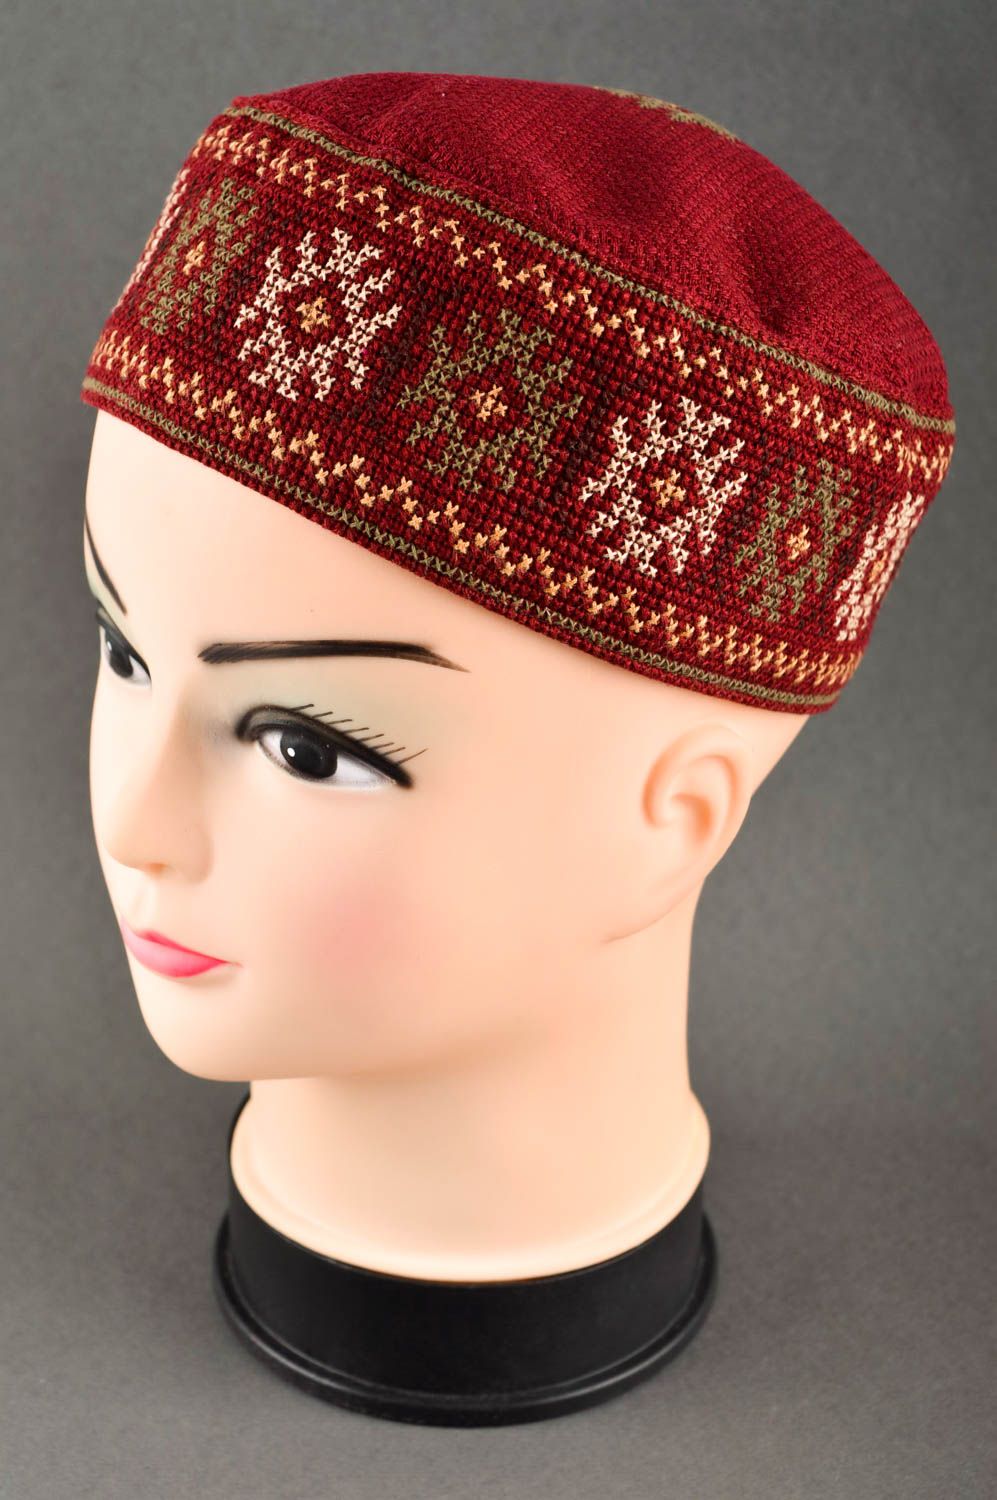 Red handmade fabric hat textile hat for men head accessories gifts for him photo 1